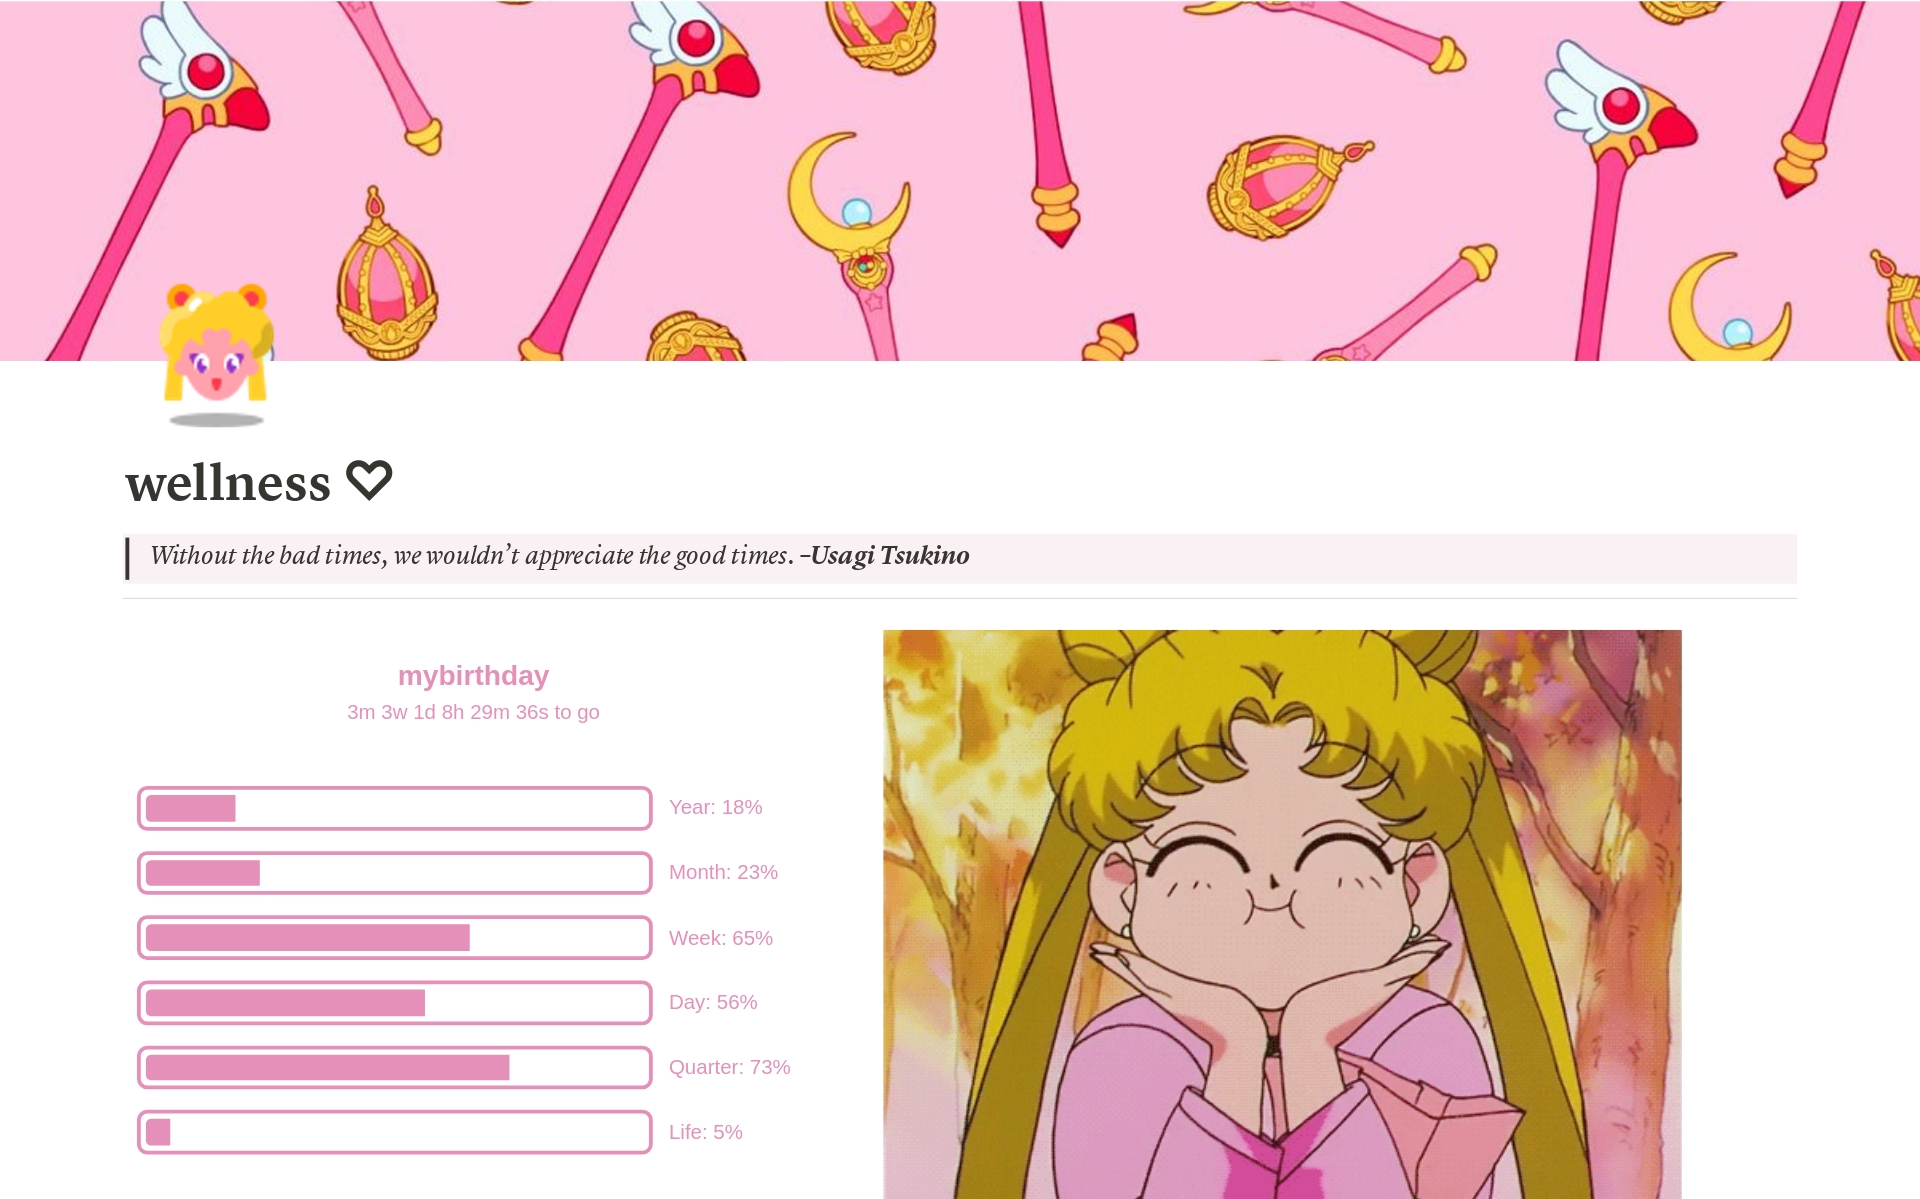 A Sailor Moon/Usagi Tsukino-themed planner with a wellness page to track things relating to mind, body and wellness, a planner with a a to-do list and weekly habit tracker and an academic page to track things relating to classes, grades, and notes.